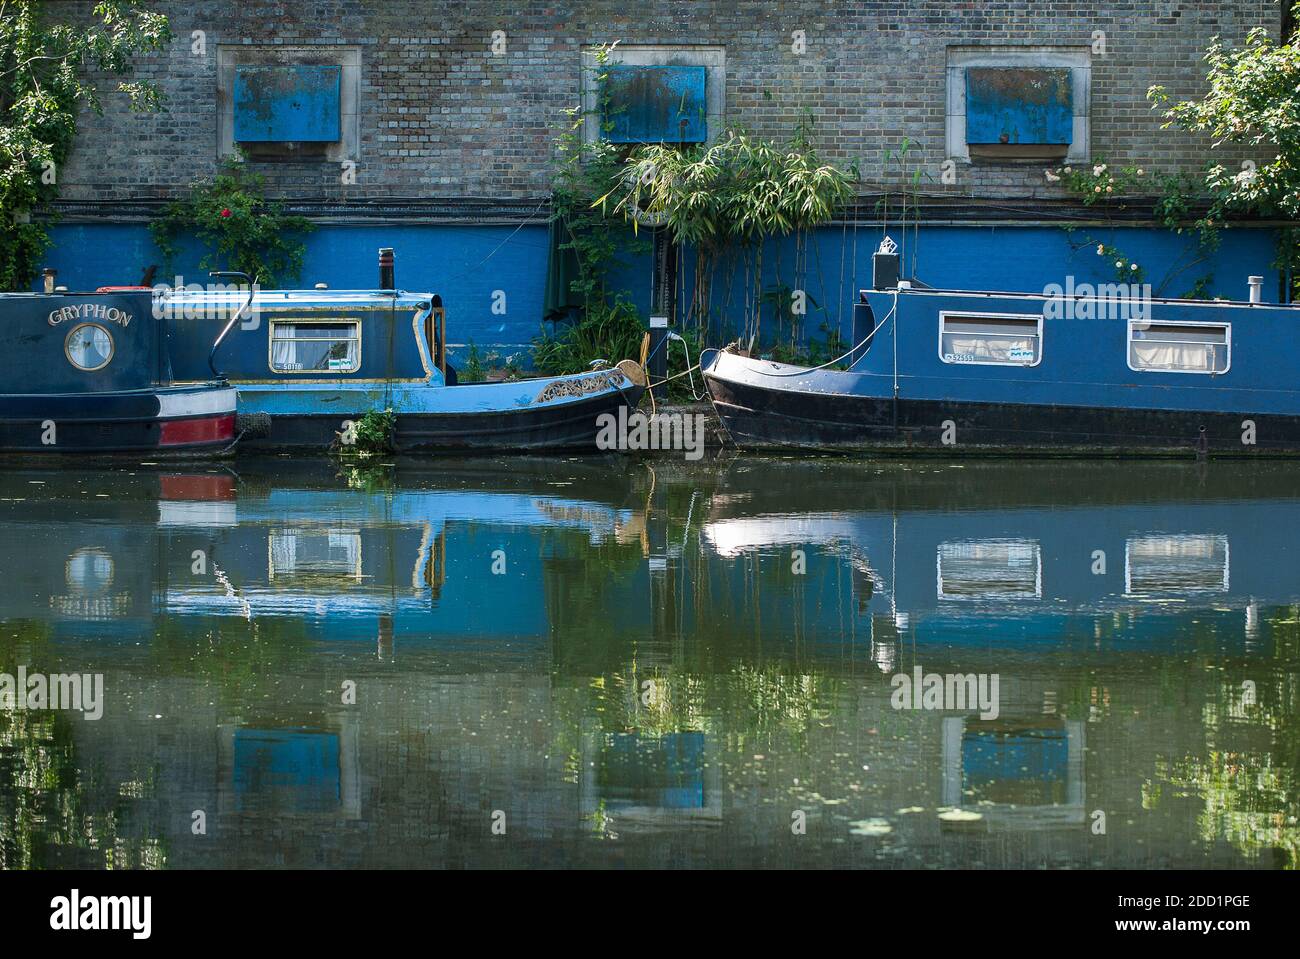 Blue canal boats along Regents Canal in London, UK. Stock Photo